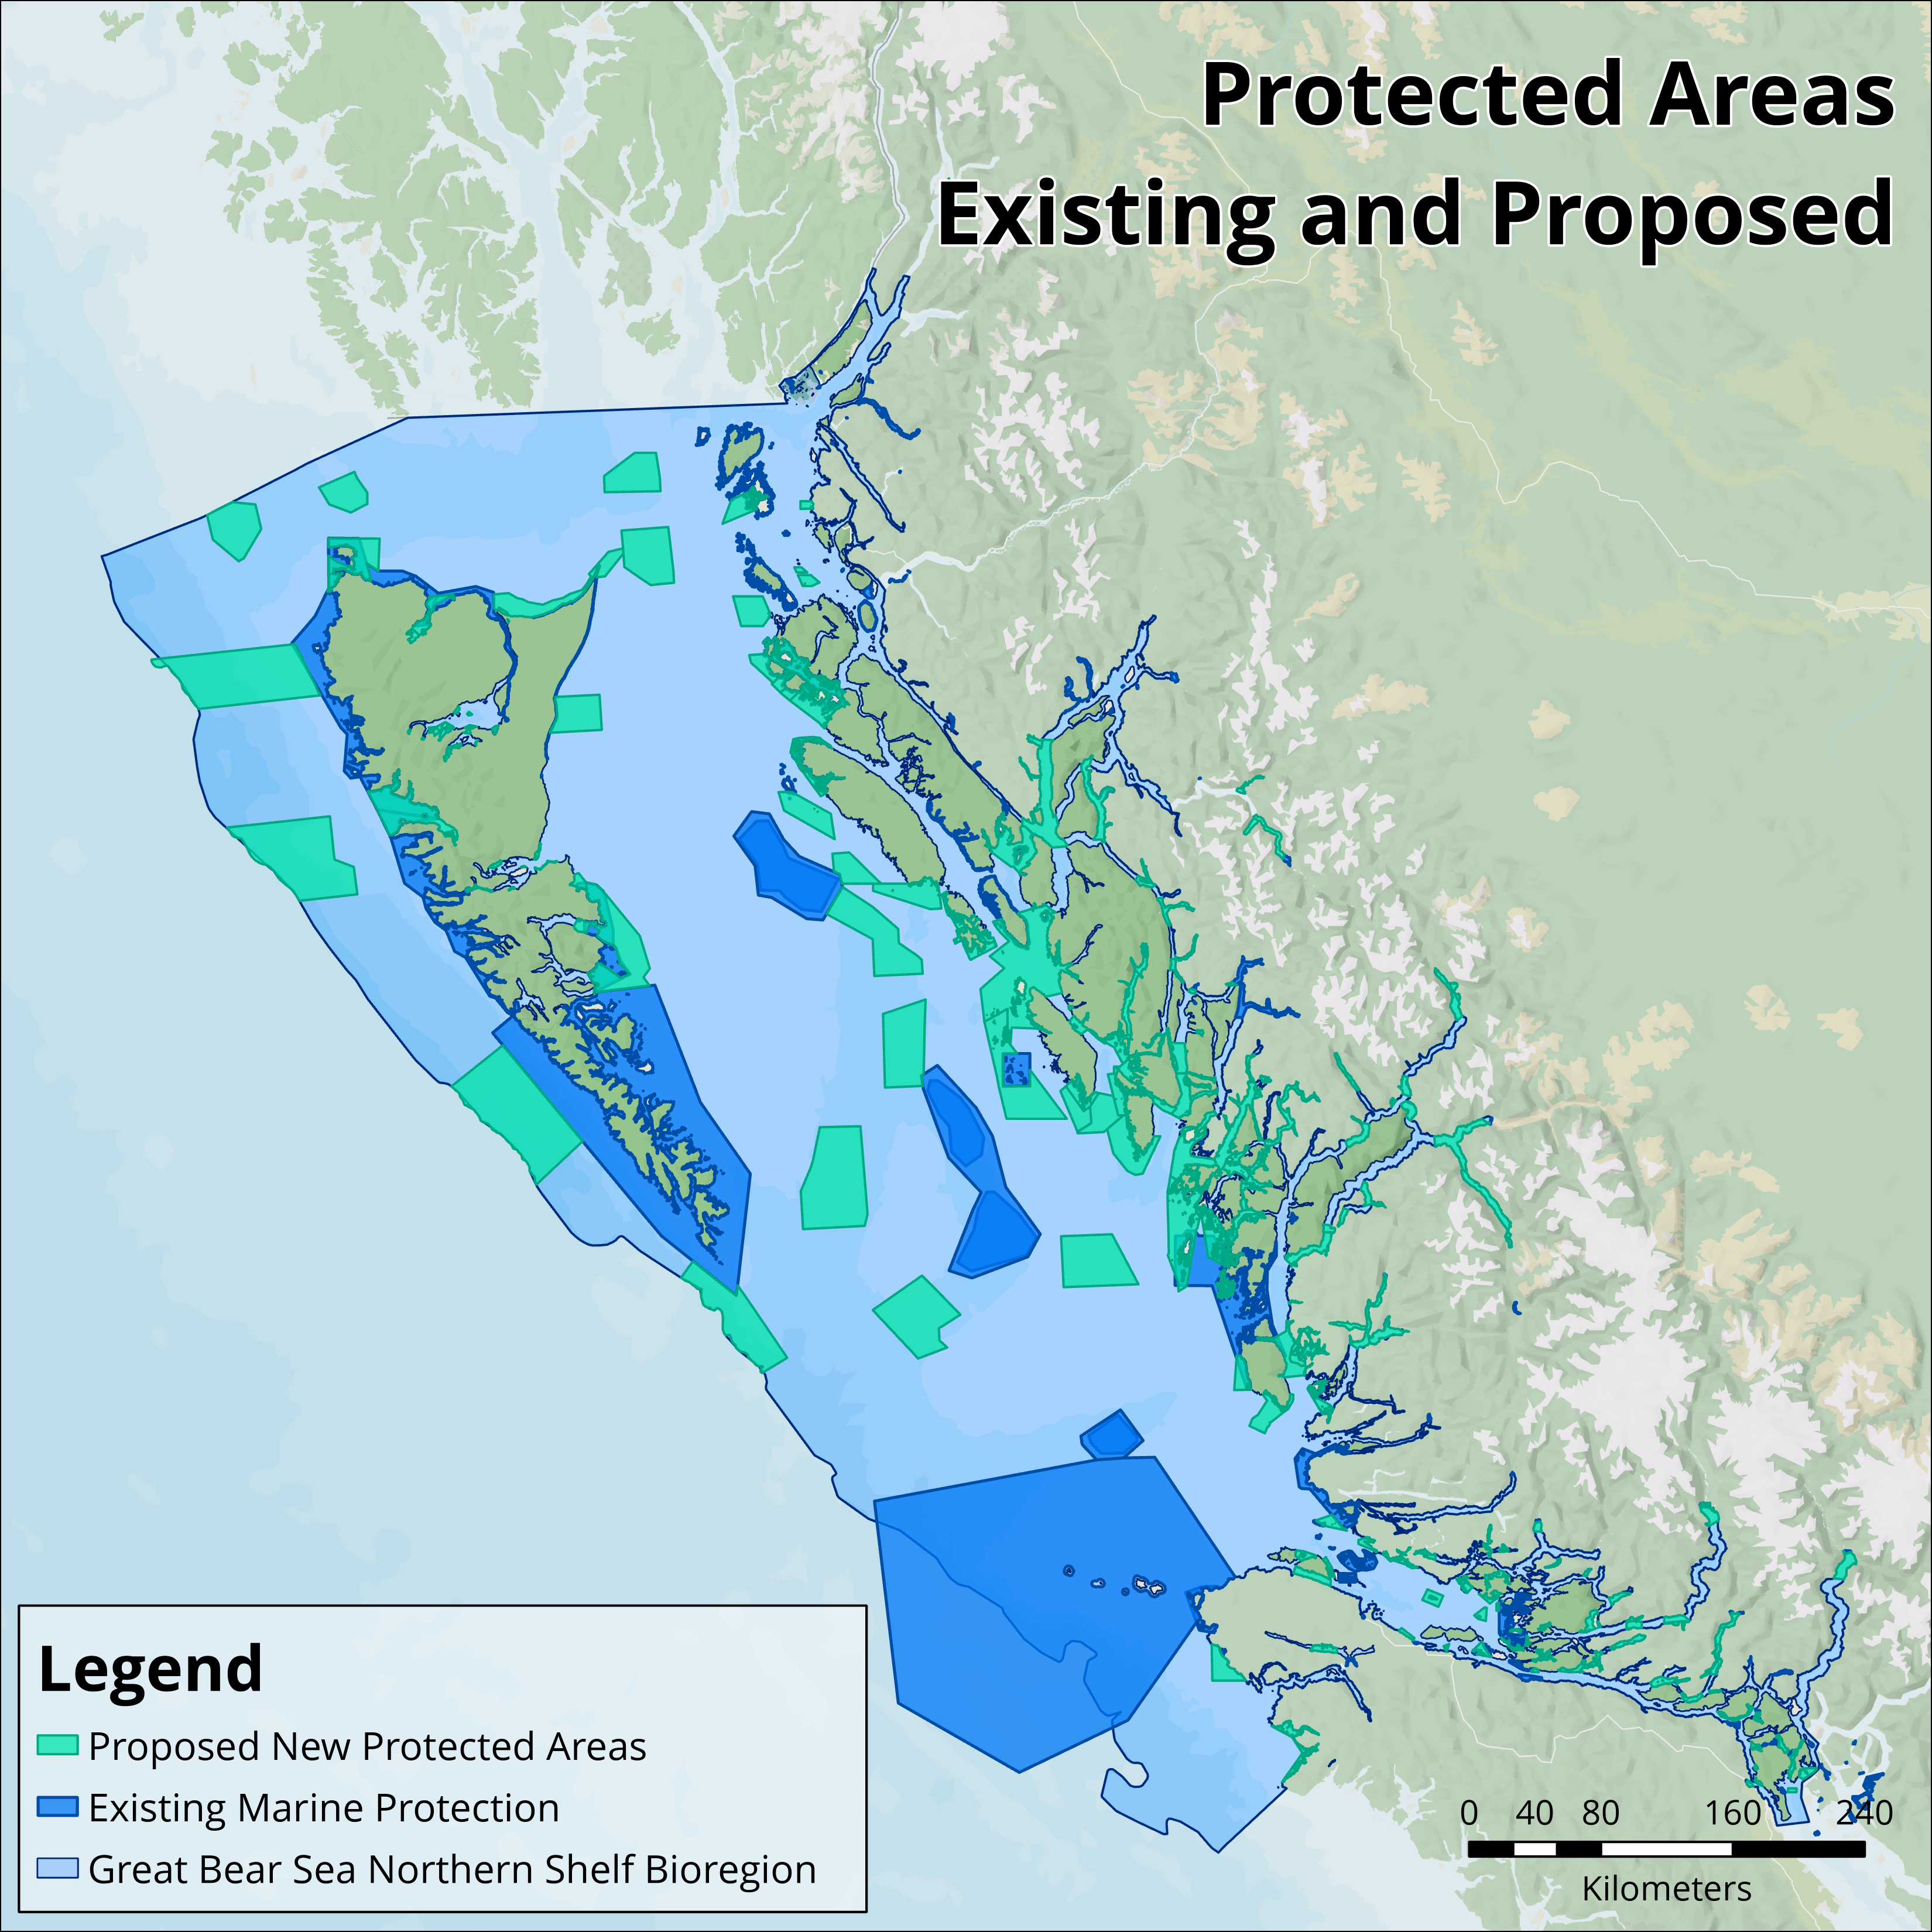 Existing and Proposed marine protection in the Great Bear Sea